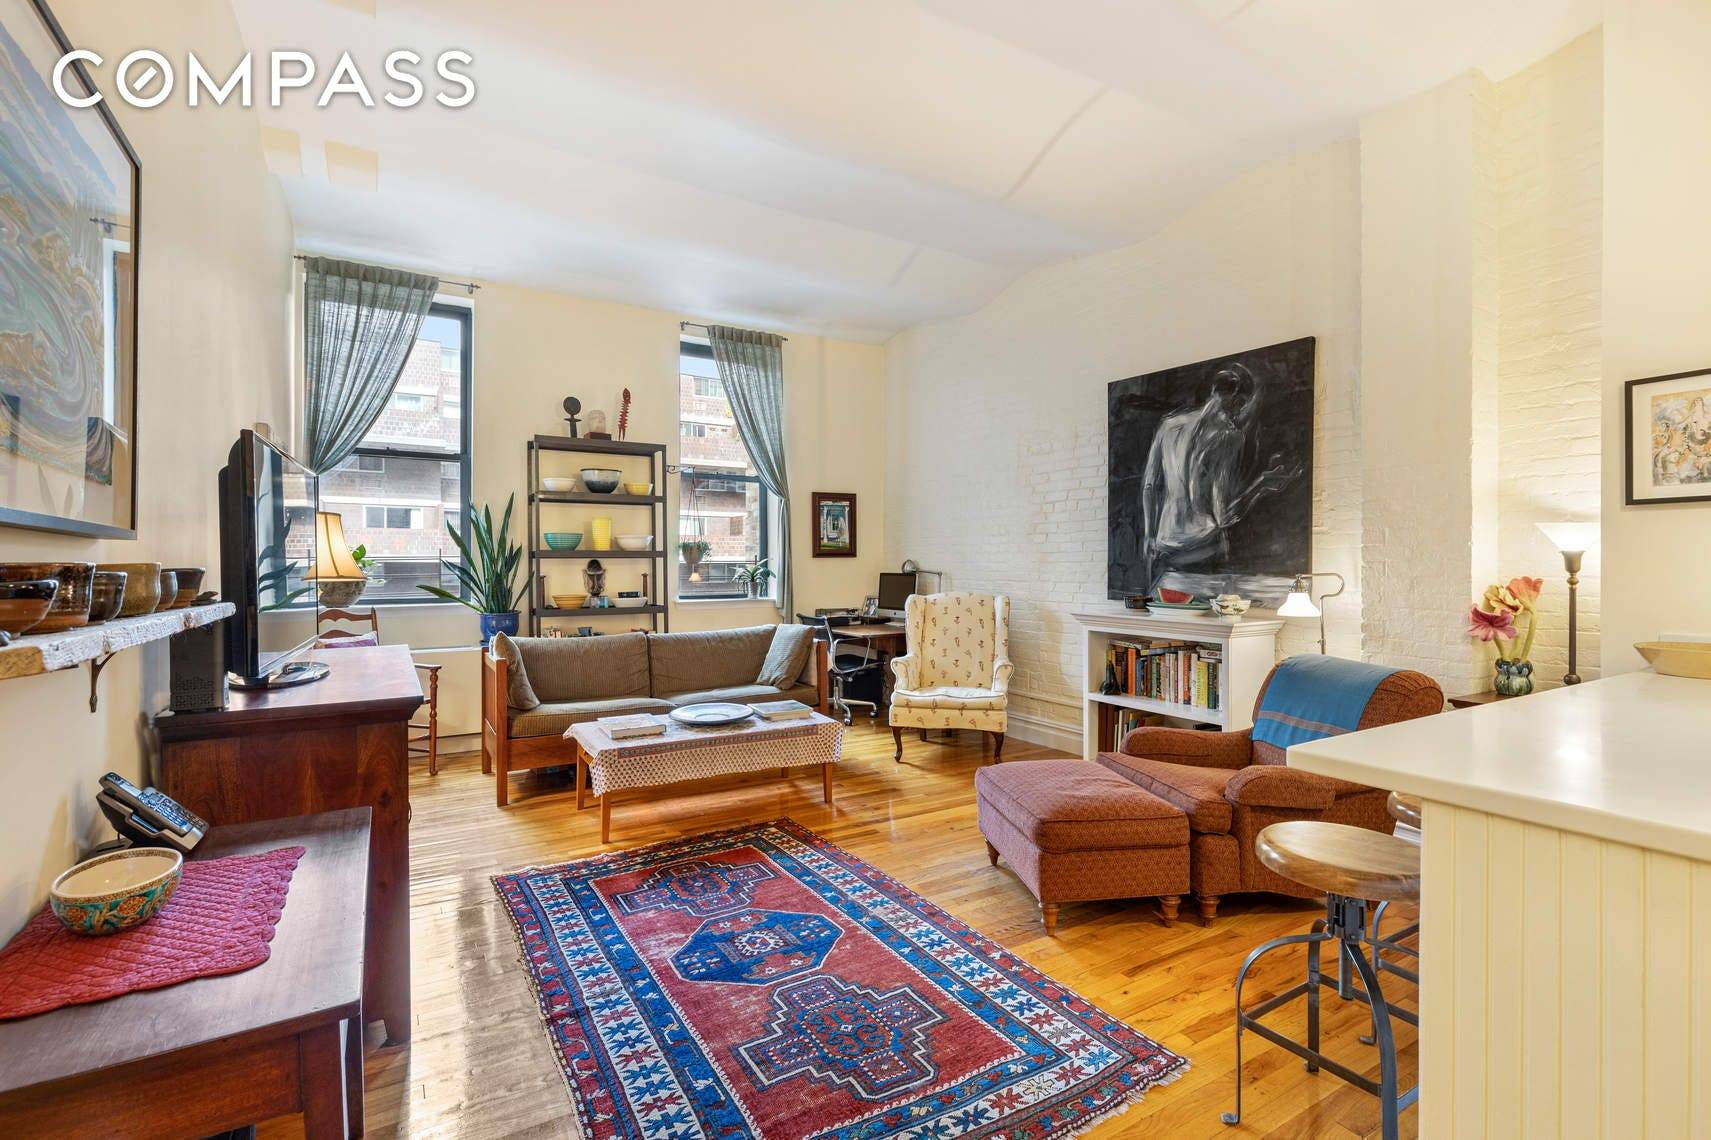 This expansive two bedroom, two bath home has a terrific layout featuring soaring barrel vaulted ceilings and white exposed brick walls.